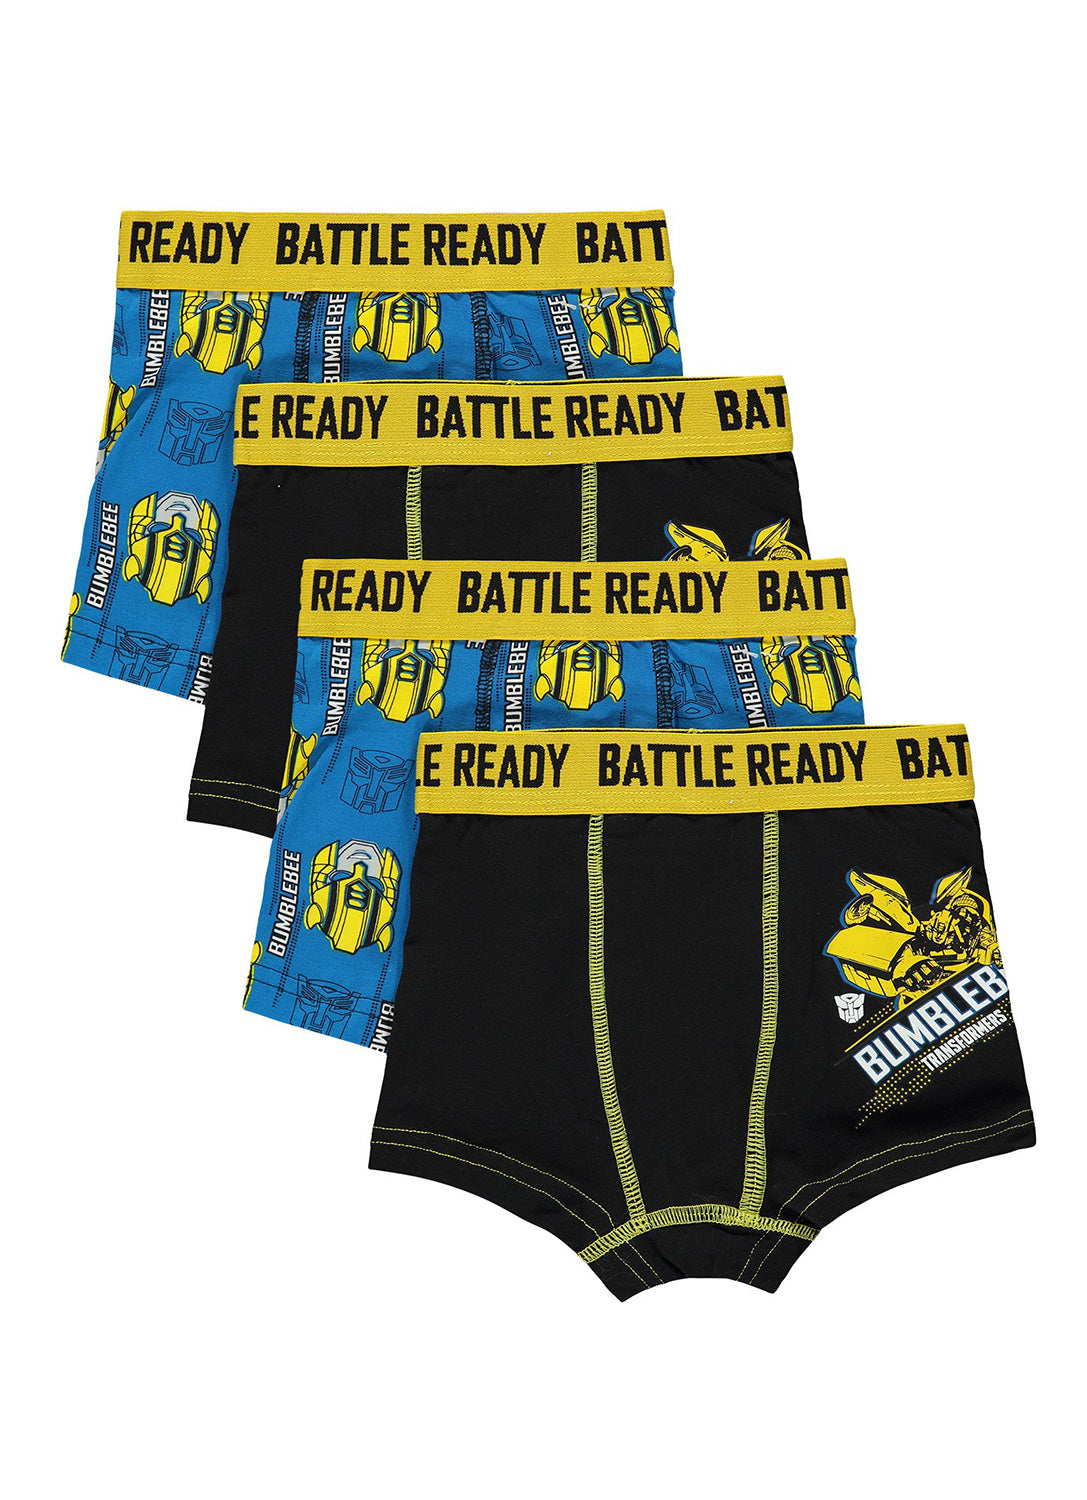 4 Boys Boxers with Transformers print